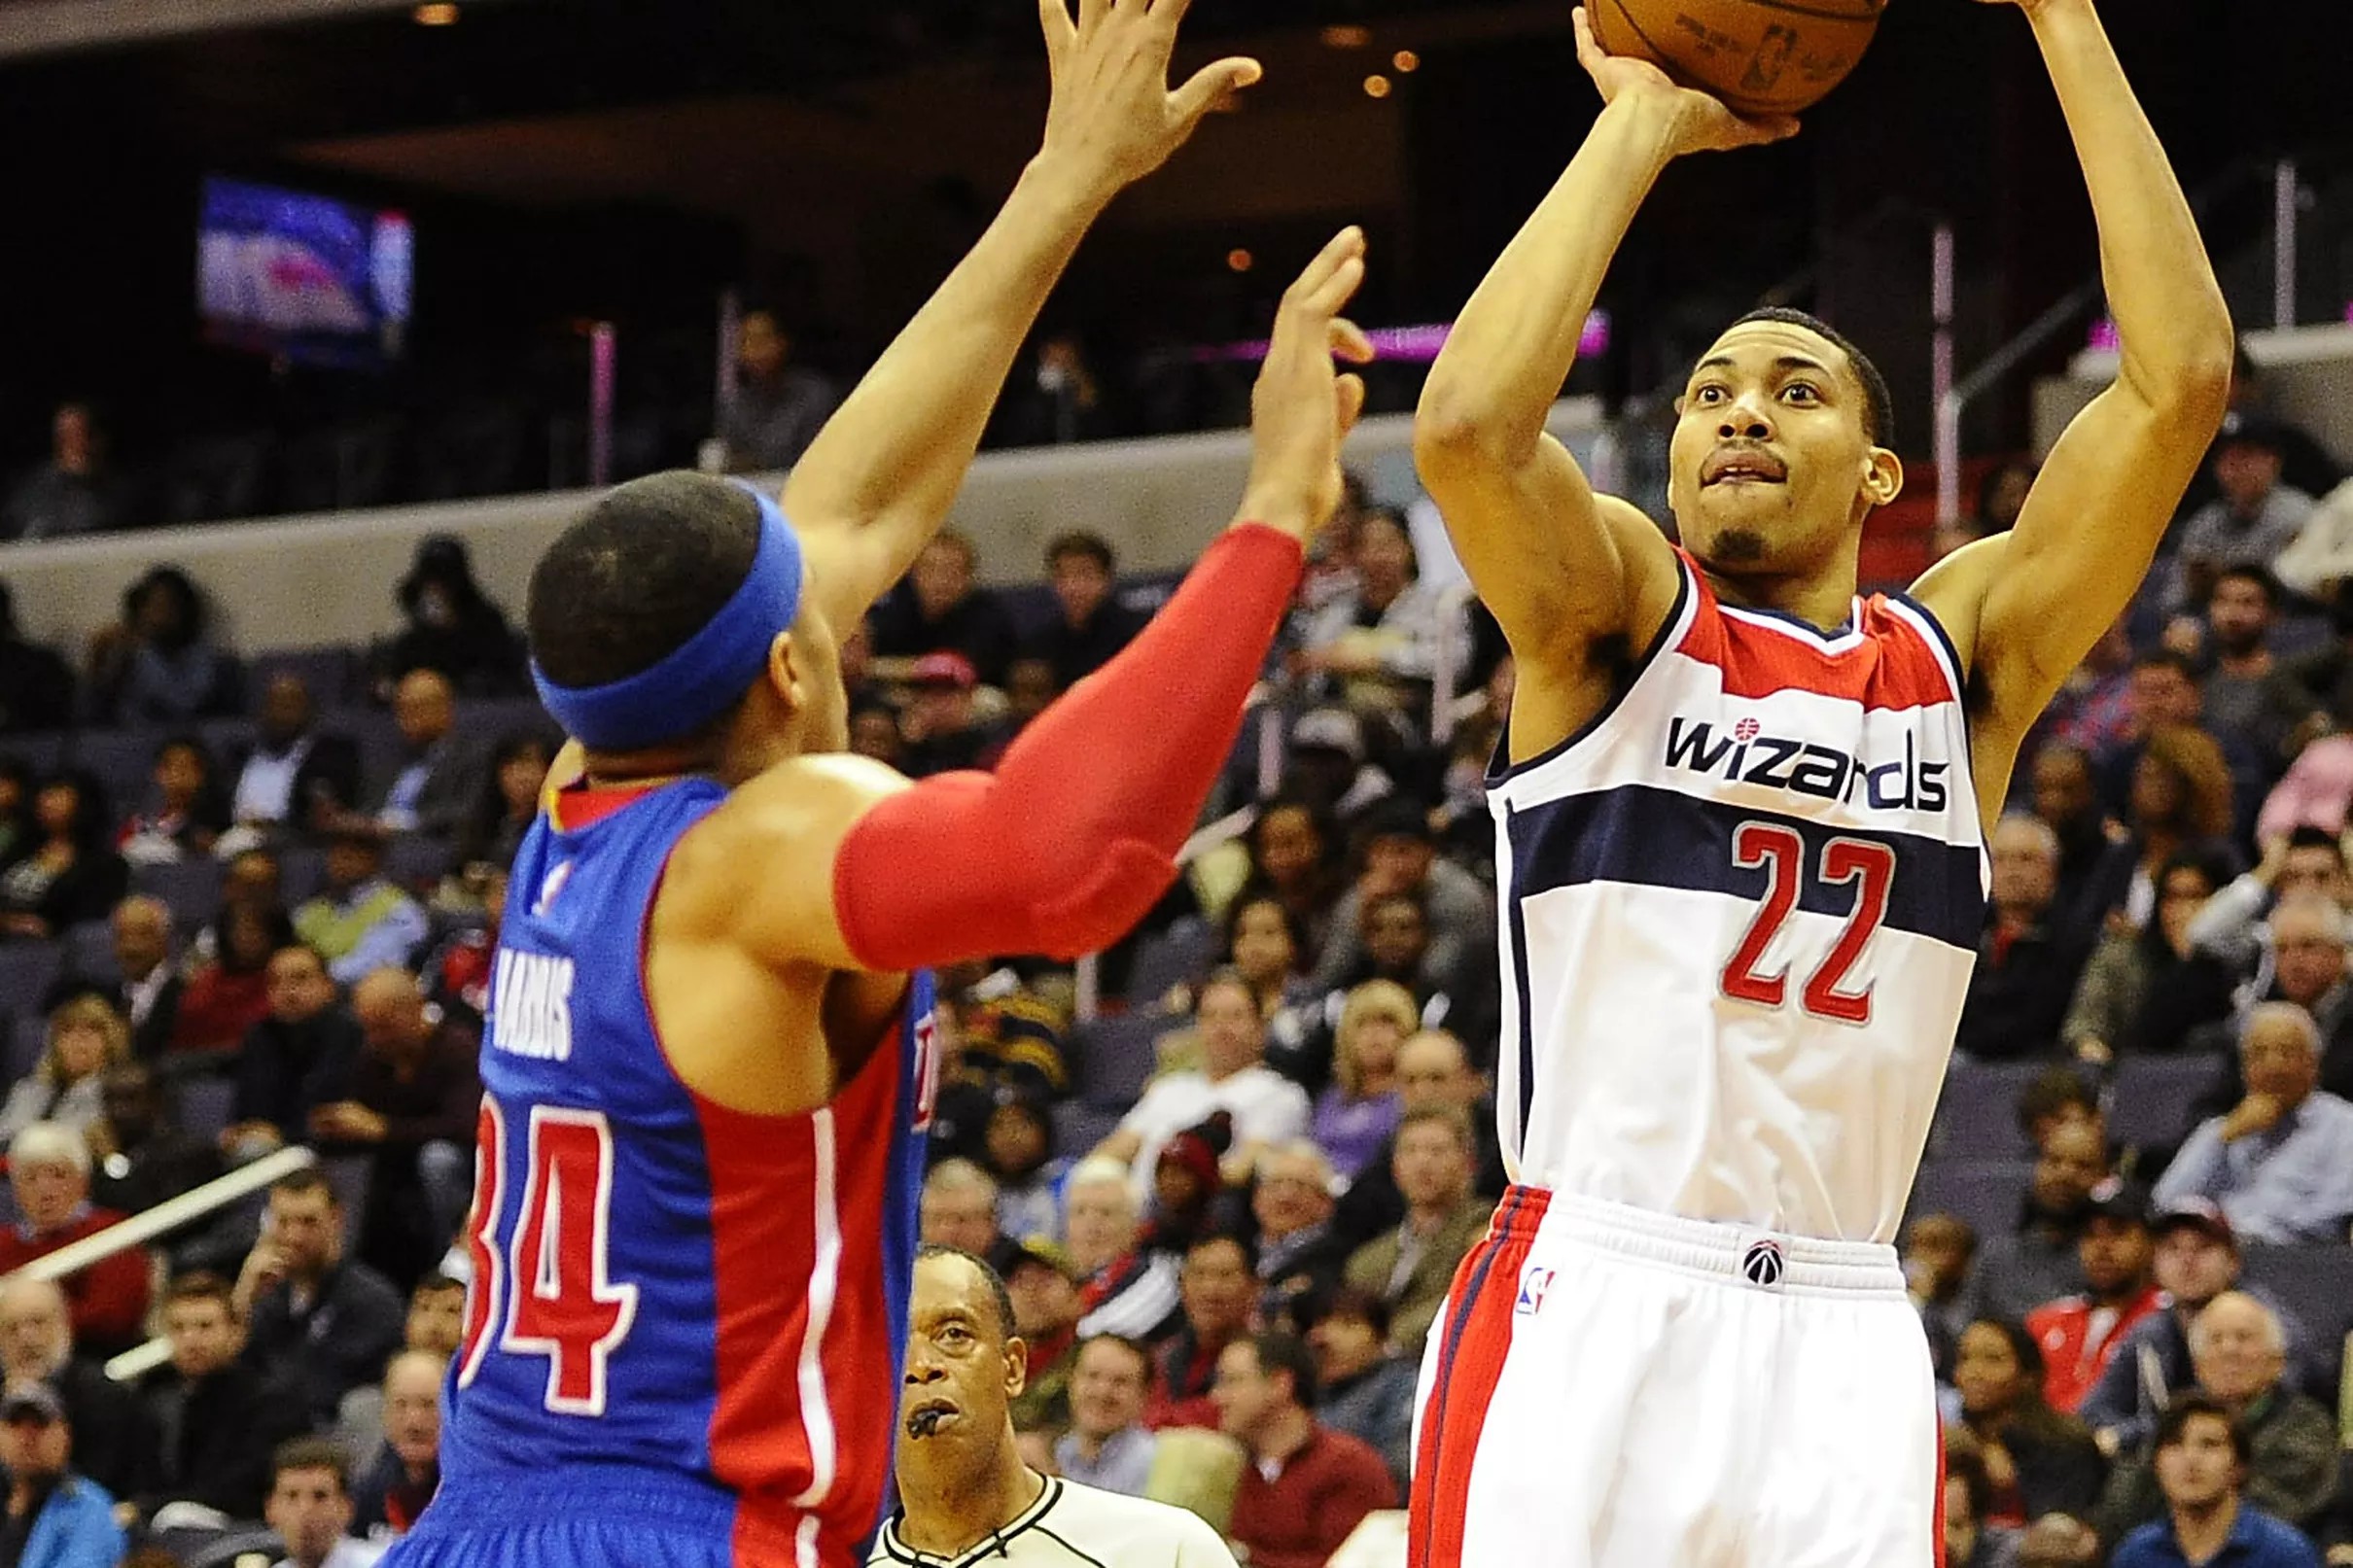 Wizards vs. Pistons preview Washington hosts Detroit in final game